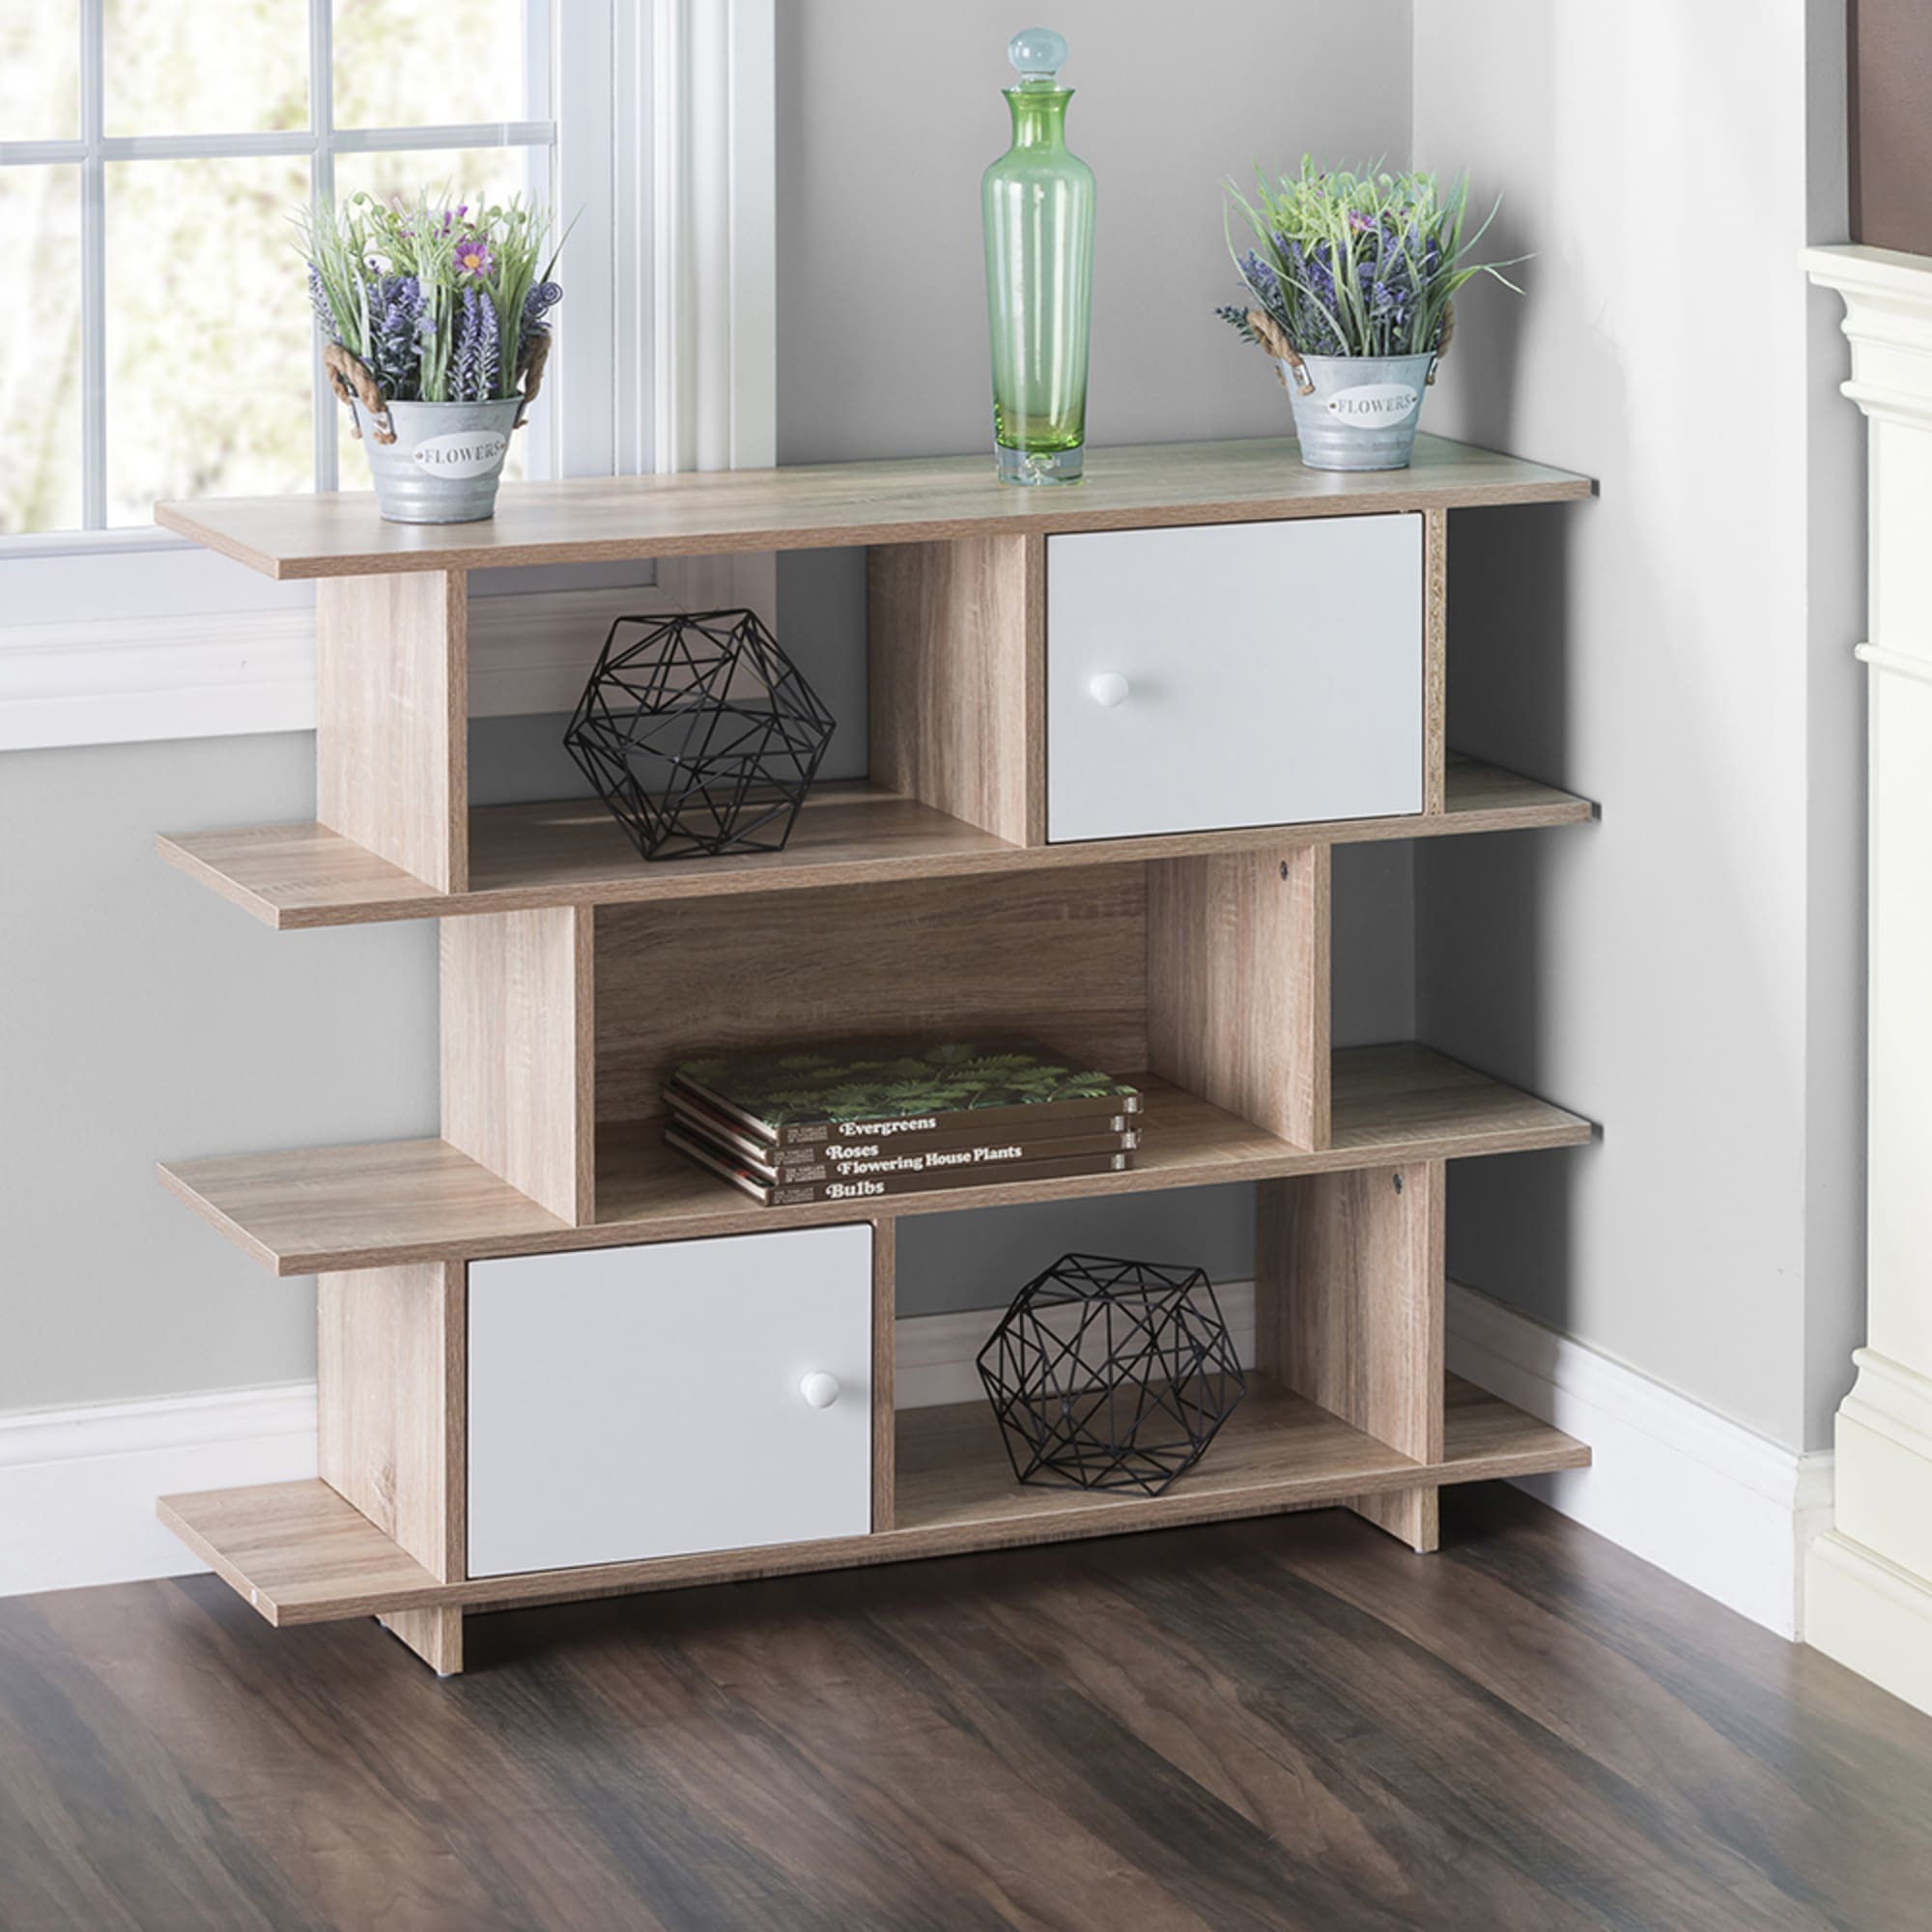 Home Basics 3 Tier Wood Display Book Shelf Organizer Unit with 2 Cabinet Doors, Oak $60 EACH, CASE PACK OF 1